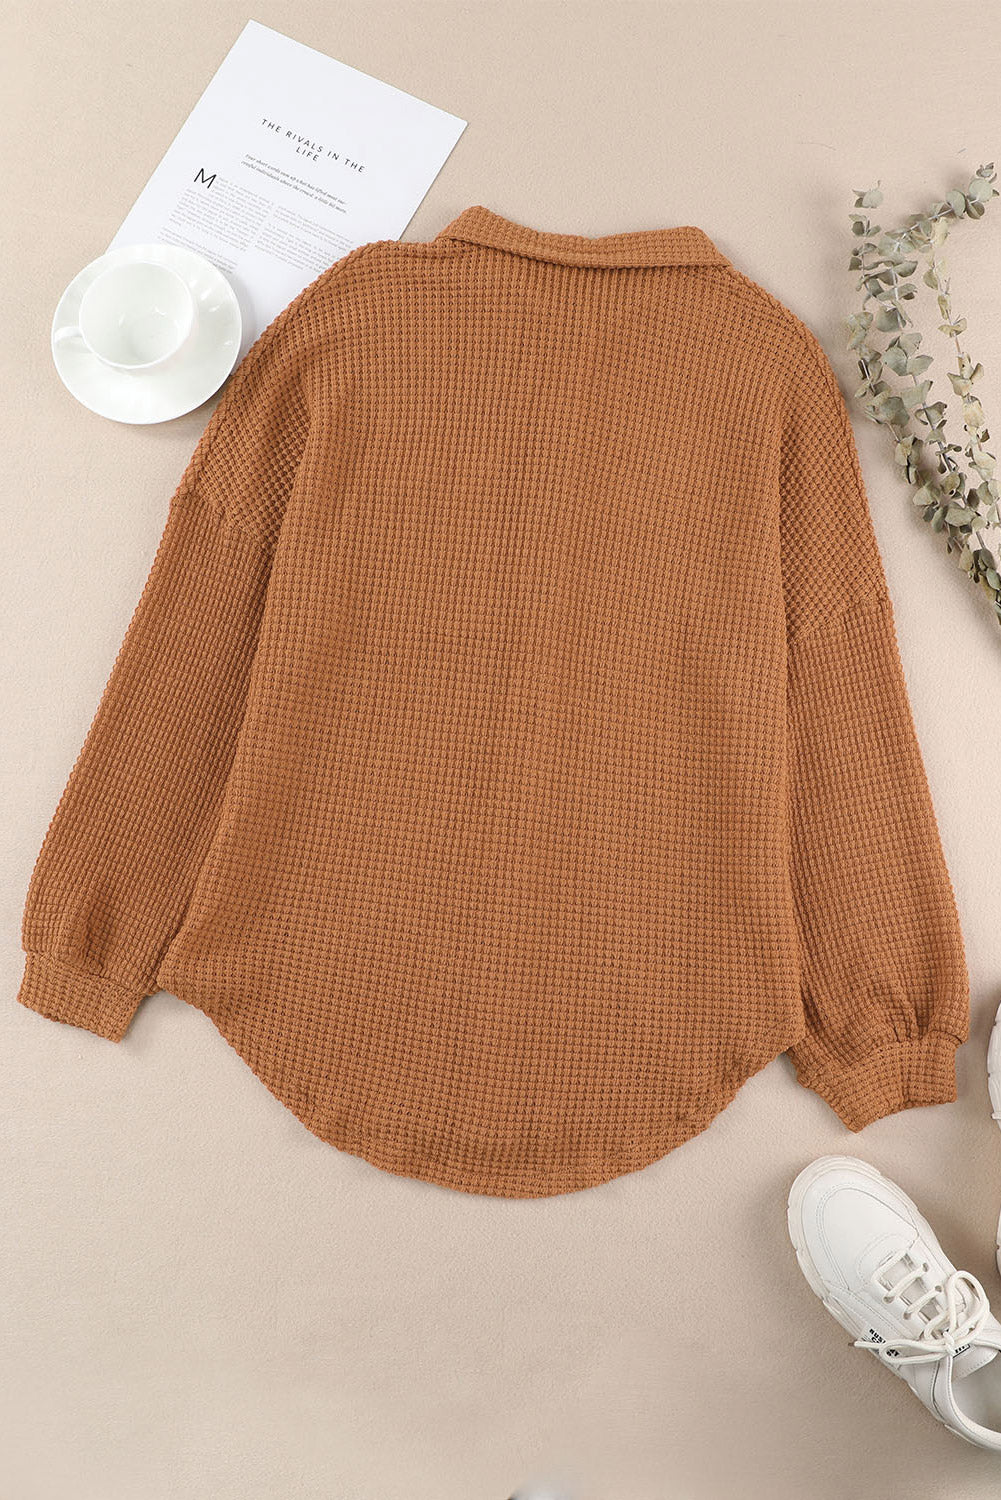 Brown Waffle Knit Button Up Casual Shirt